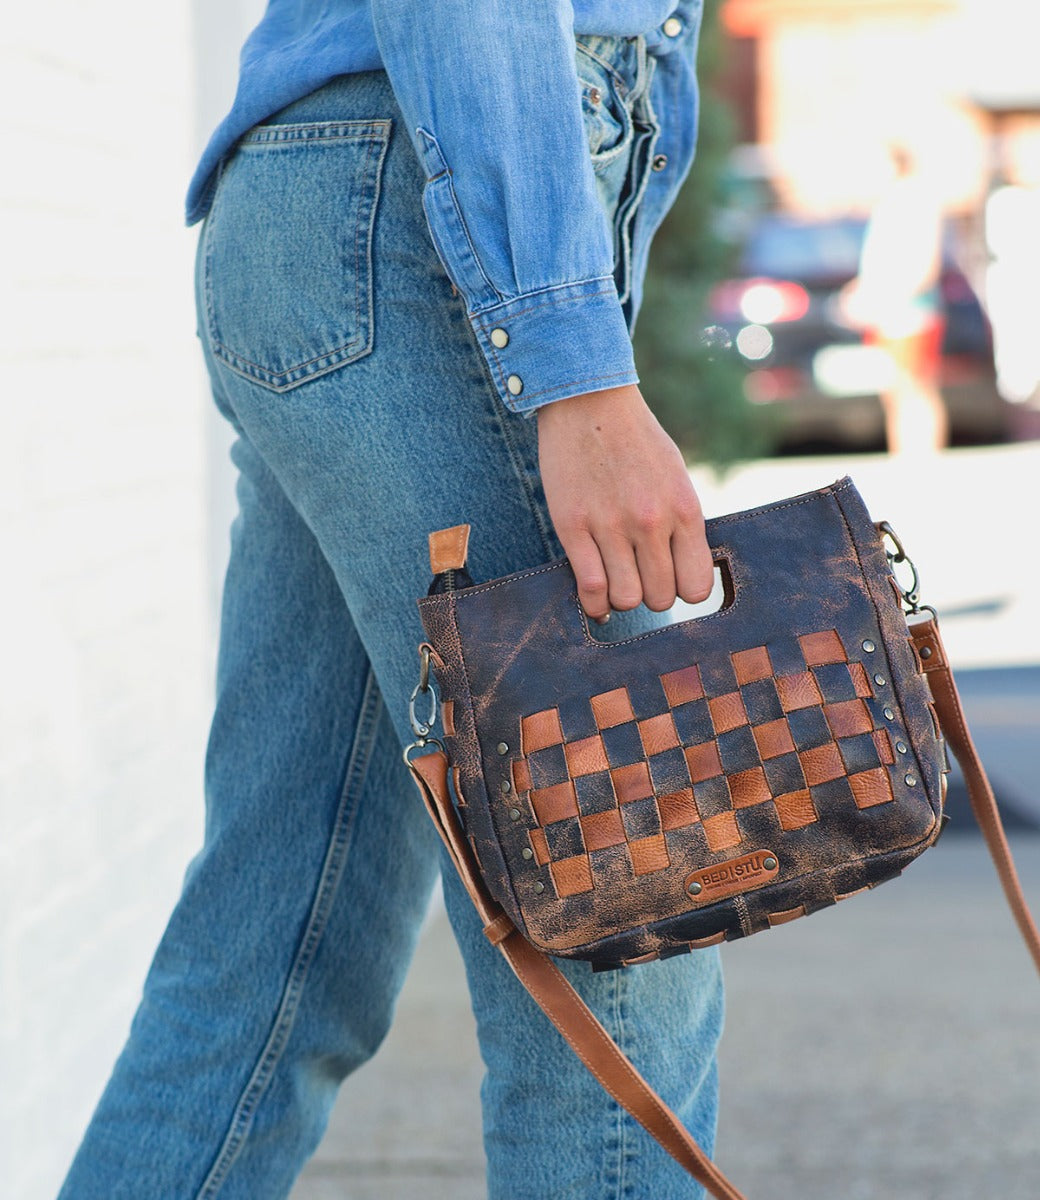 A woman wearing blue jeans and a Bed Stu Keiki checkered purse.